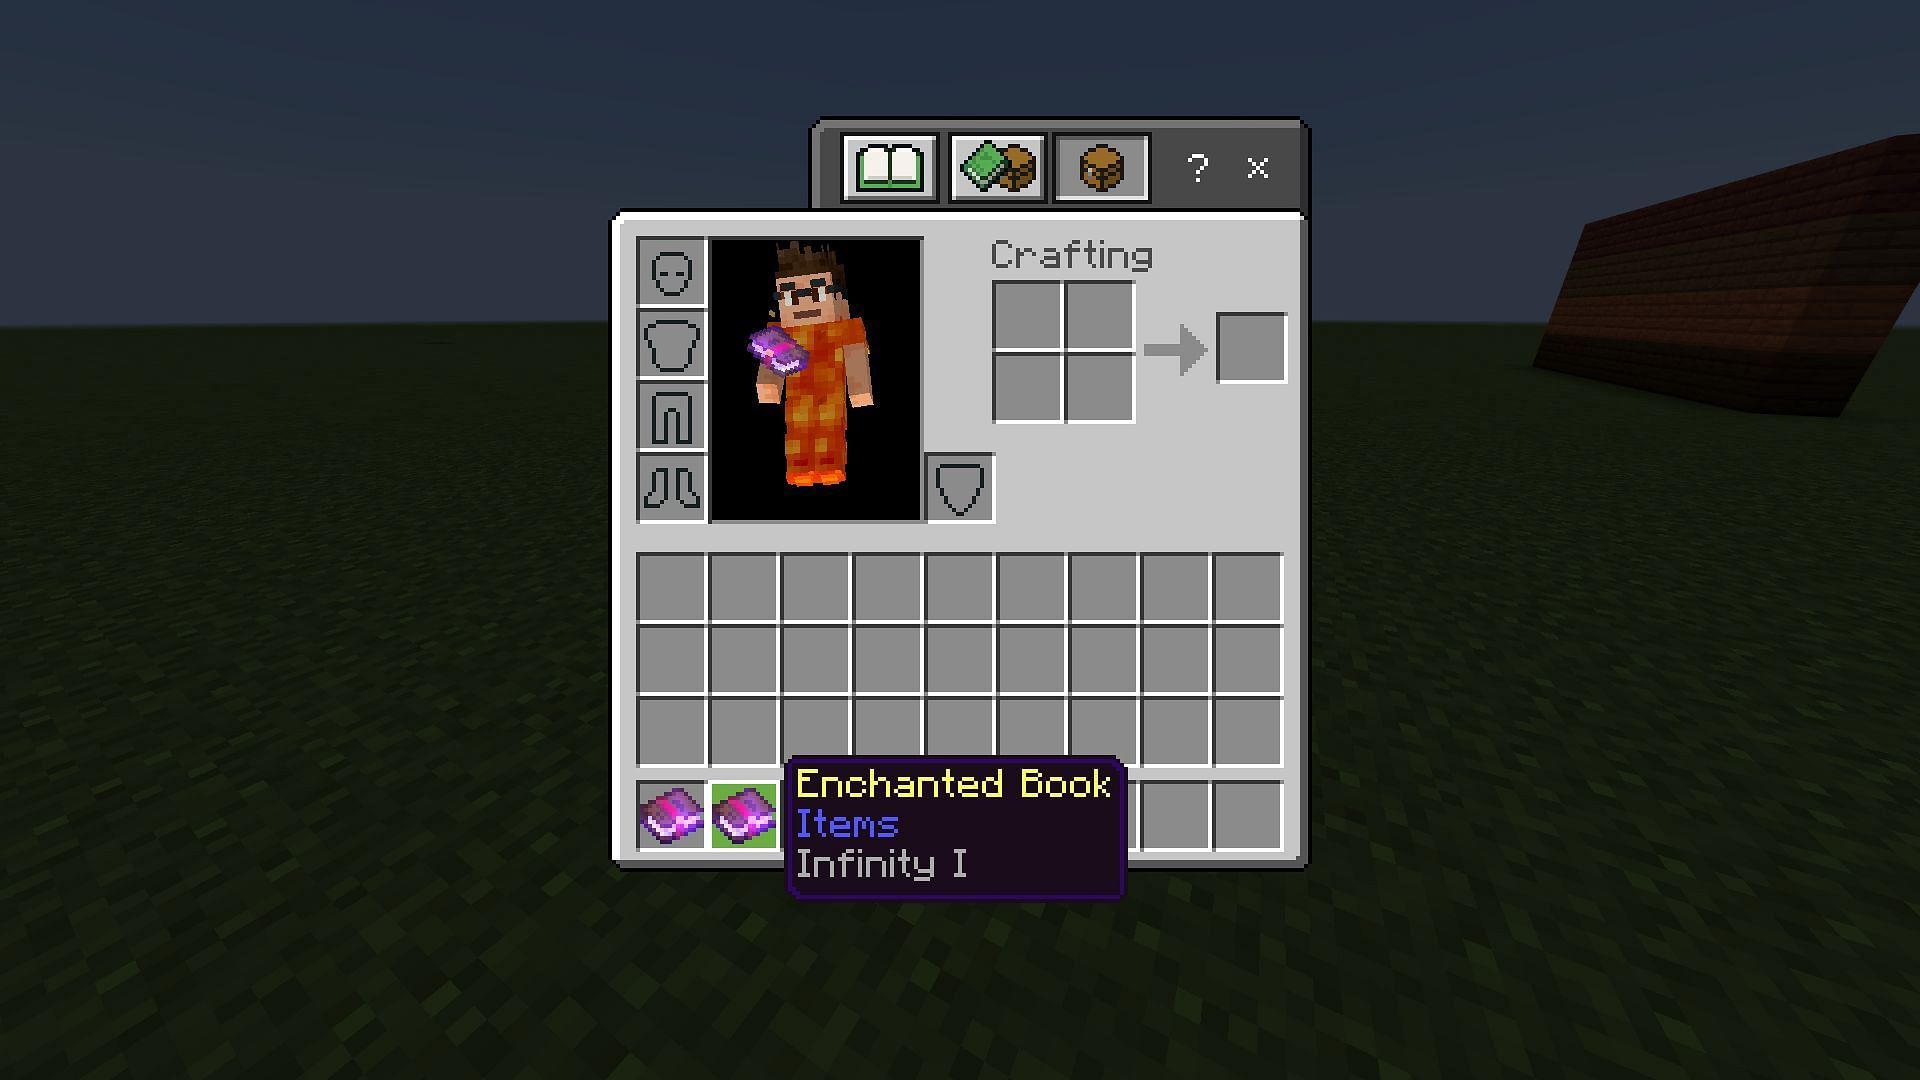 Infinity enchantment allows players to shoot infinite arrows in Minecraft (Image via Mojang)